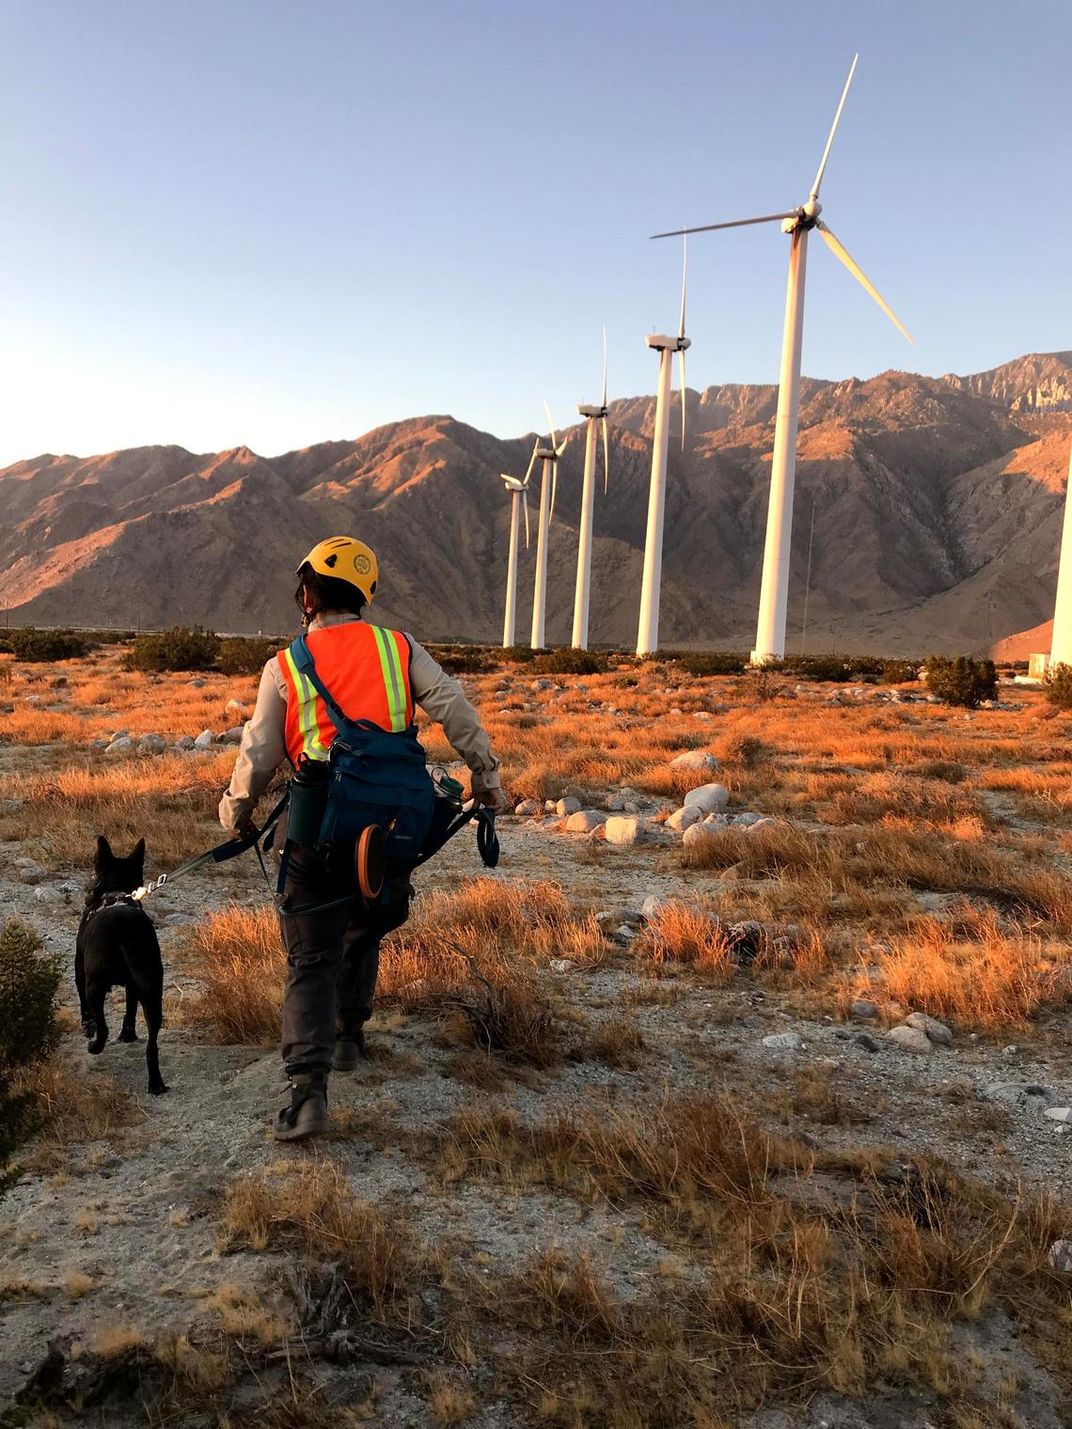 A handler wearing a safety vest walks a dog on a leash in the desert near windmills 